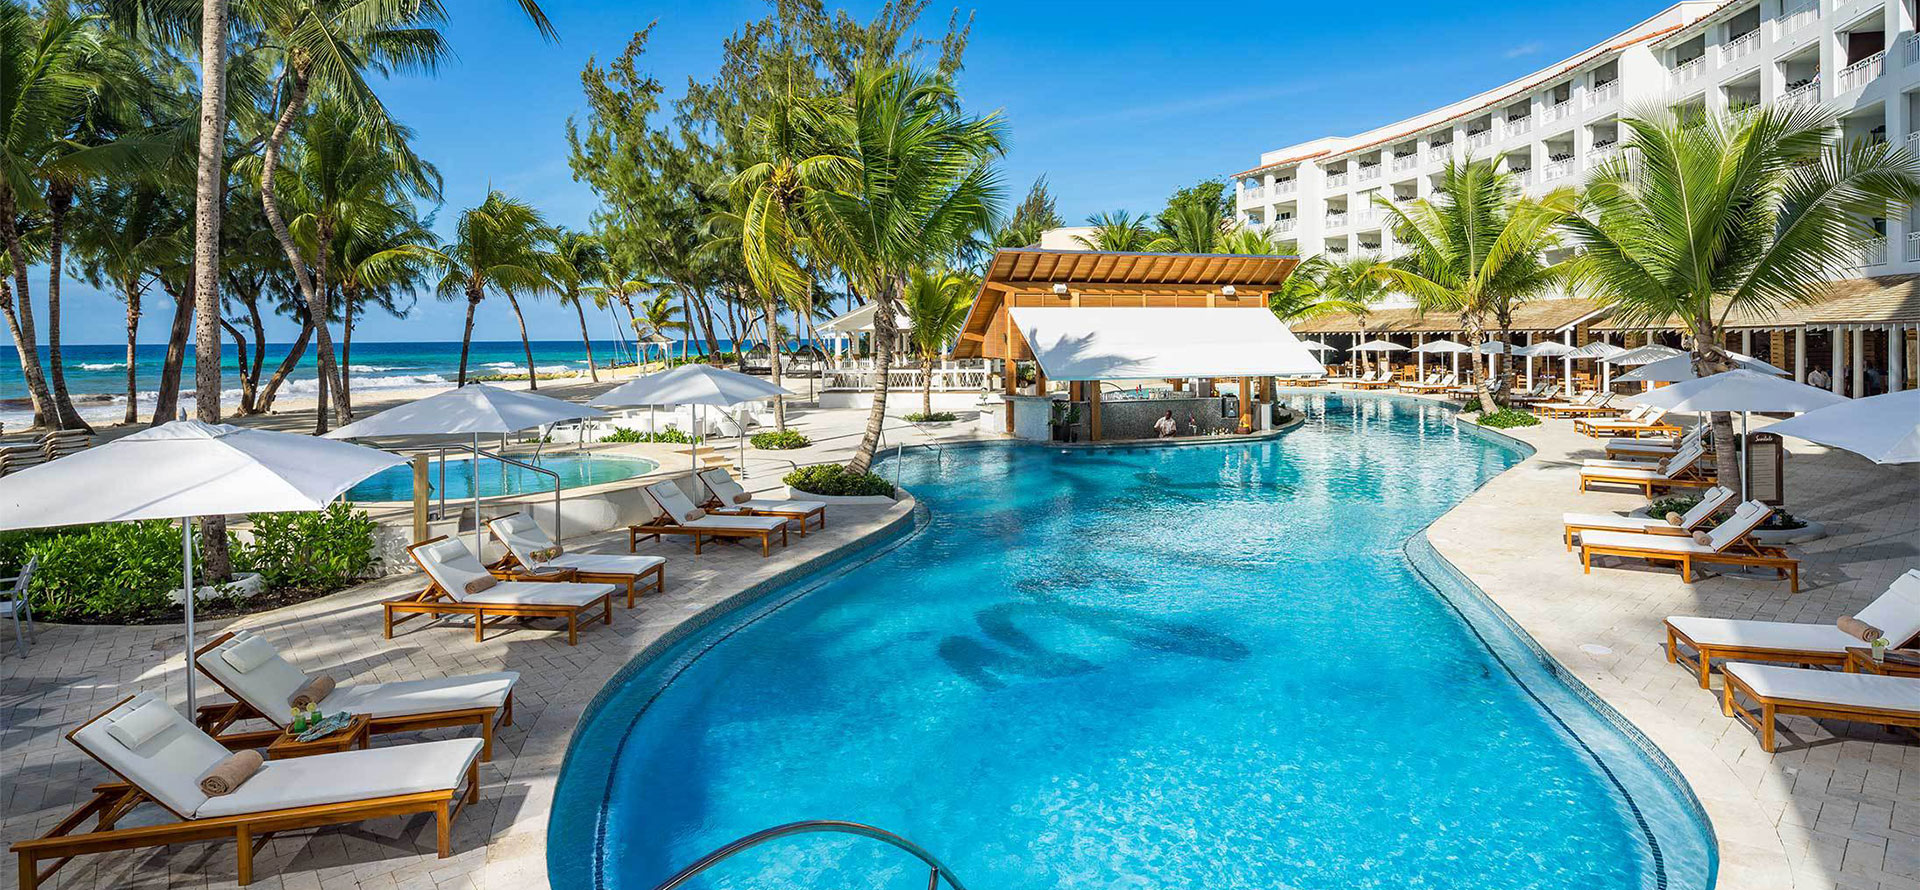 Barbados all-inclusive adults only resort and bar.